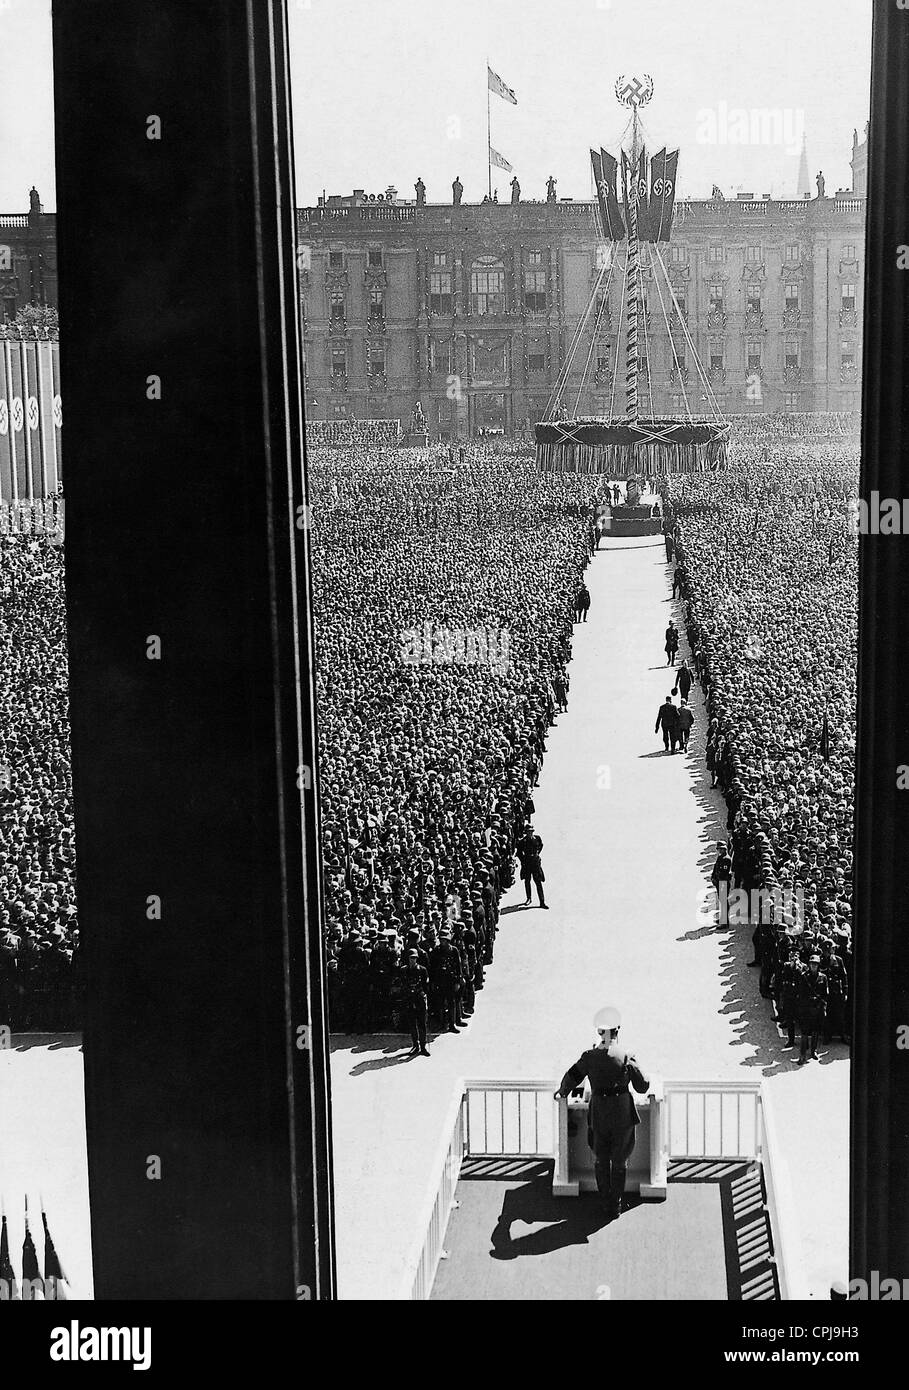 Adolf Hitler speaks at the rally for the First of May, 1937 Stock Photo